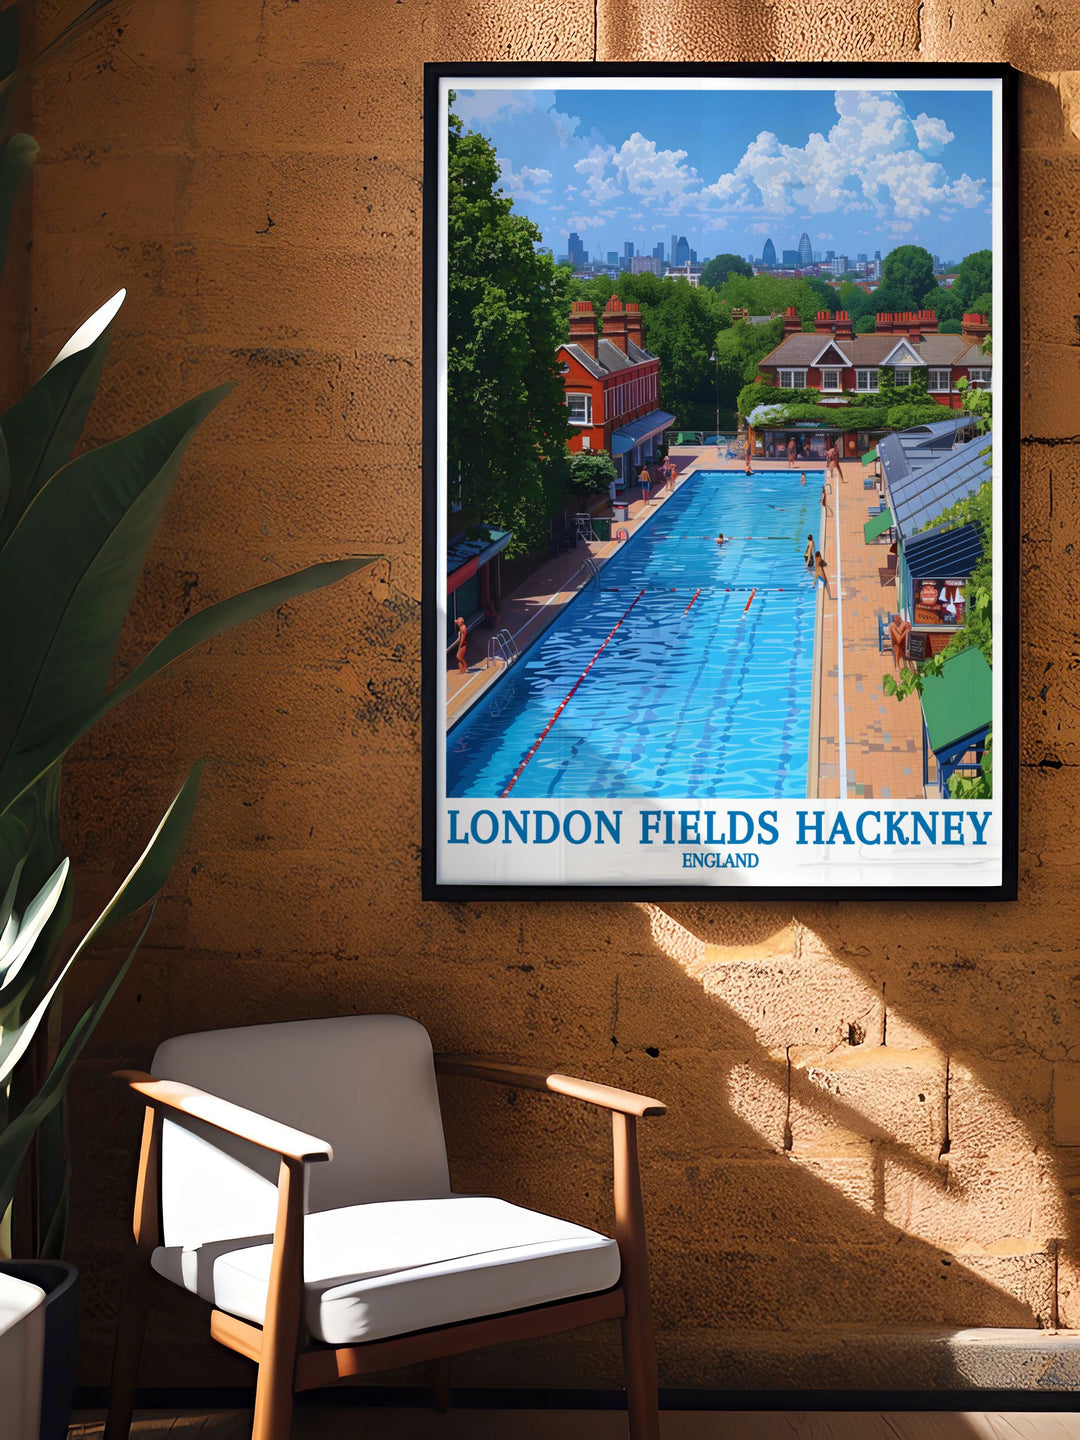 This vibrant art print of London Fields Hackney captures the community spirit and recreational activities of the park, making it a standout piece for those who love urban green spaces.